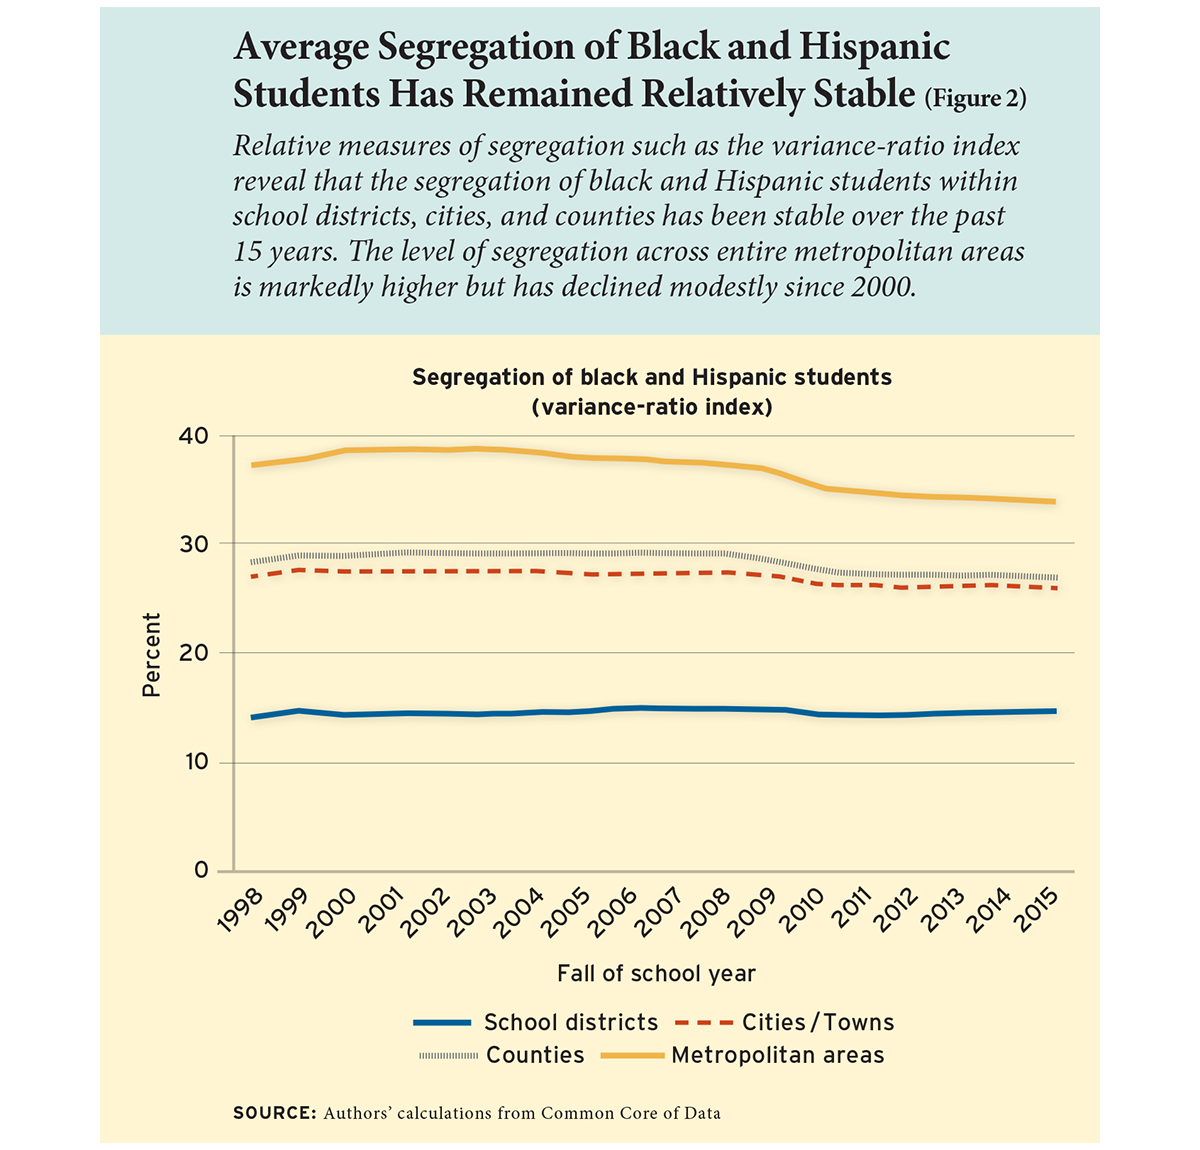 Average Segregation of Black and Hispanic Students Has Remained Relatively Stable (Figure 2)